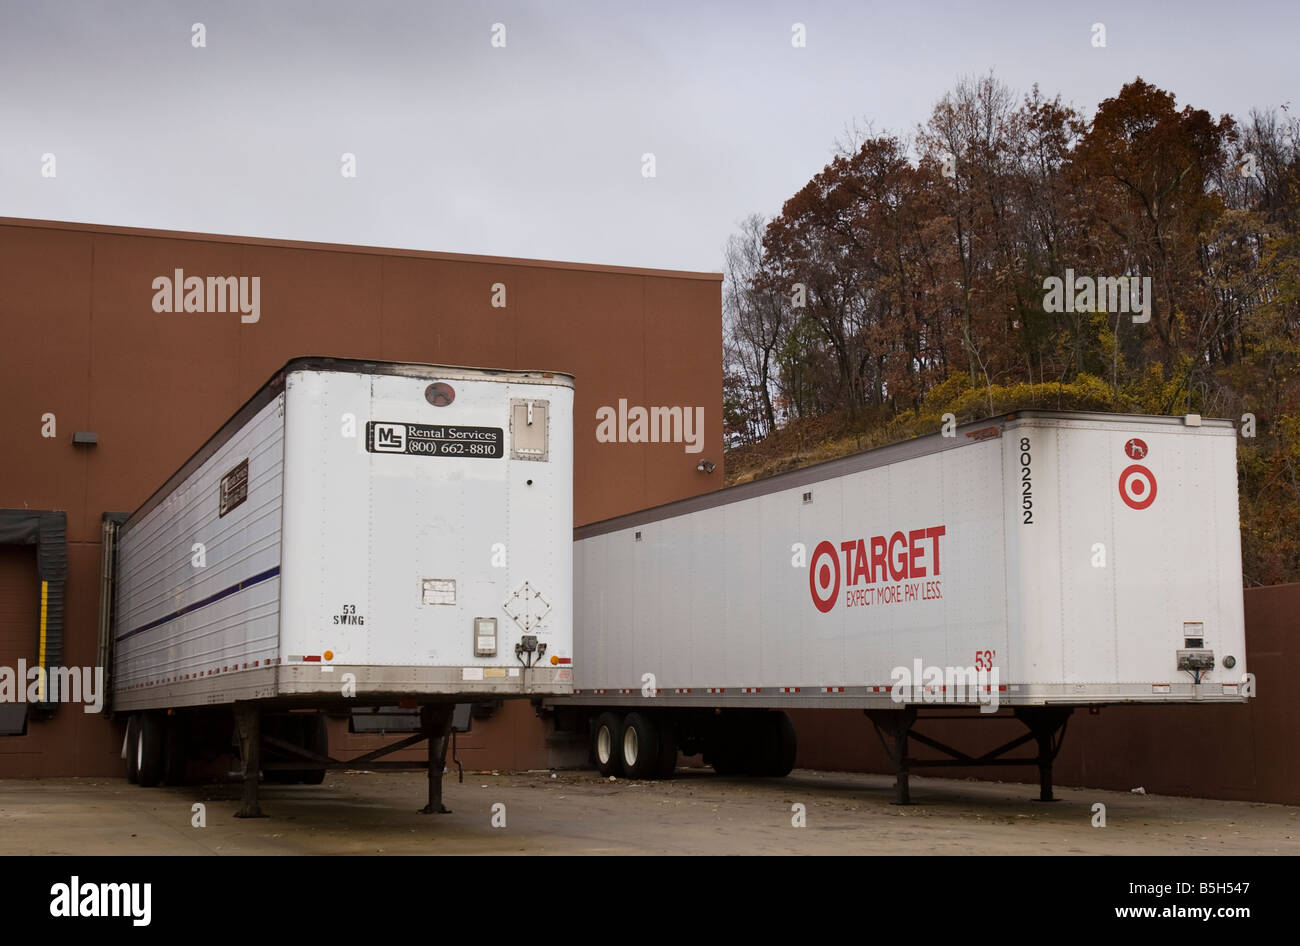 Trailers at a loading platform Stock Photo